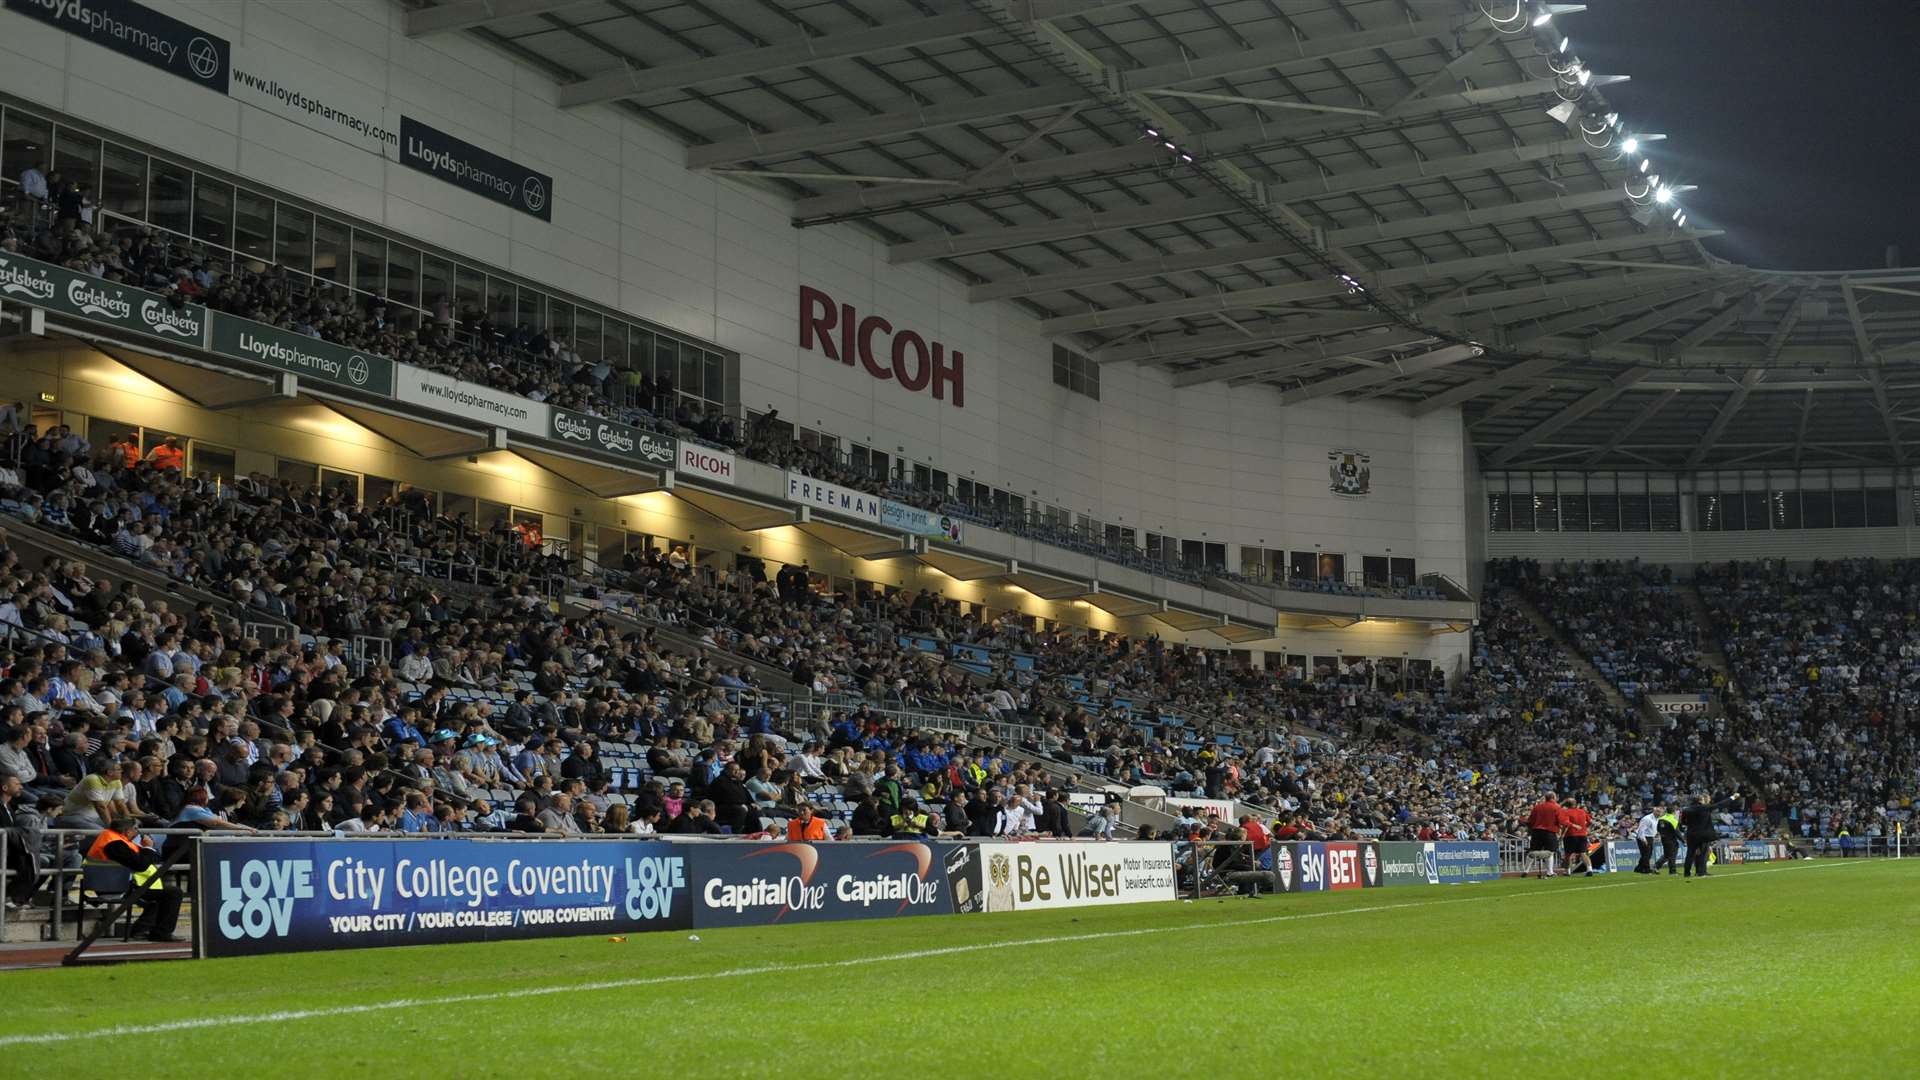 Security will be tightened for Gillingham's visit to Coventry after Paris attacks Picture: Barry Goodwin